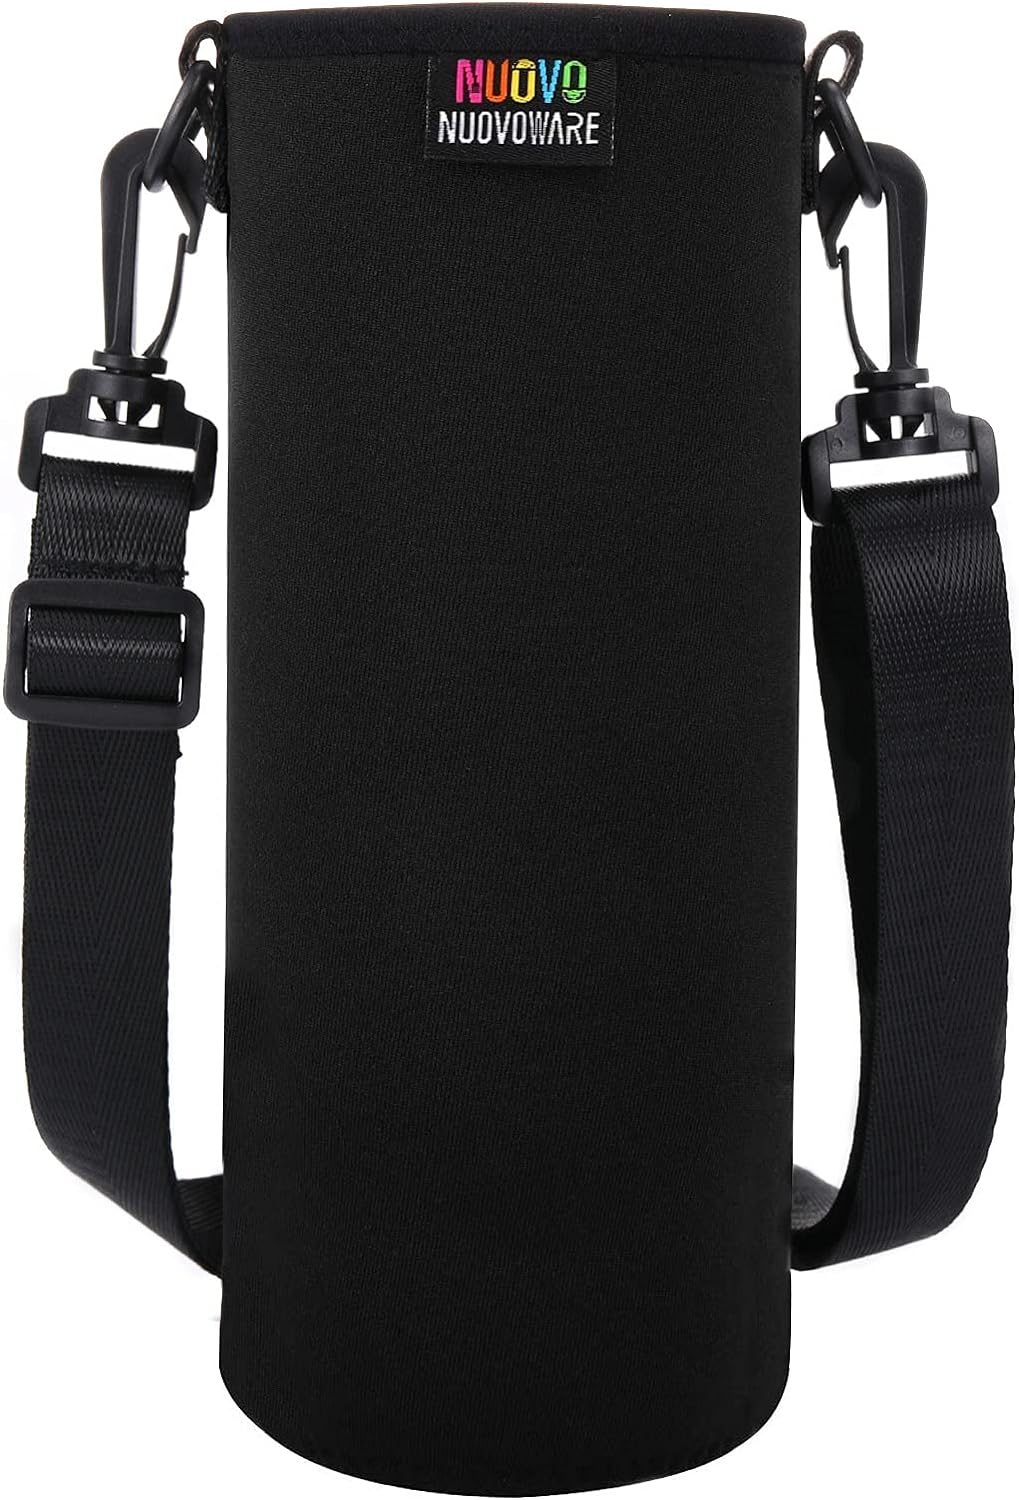 Sport Water Bottle Case Insulated Wide Mouth Bag Pouch Holder Sleeve Carrier 